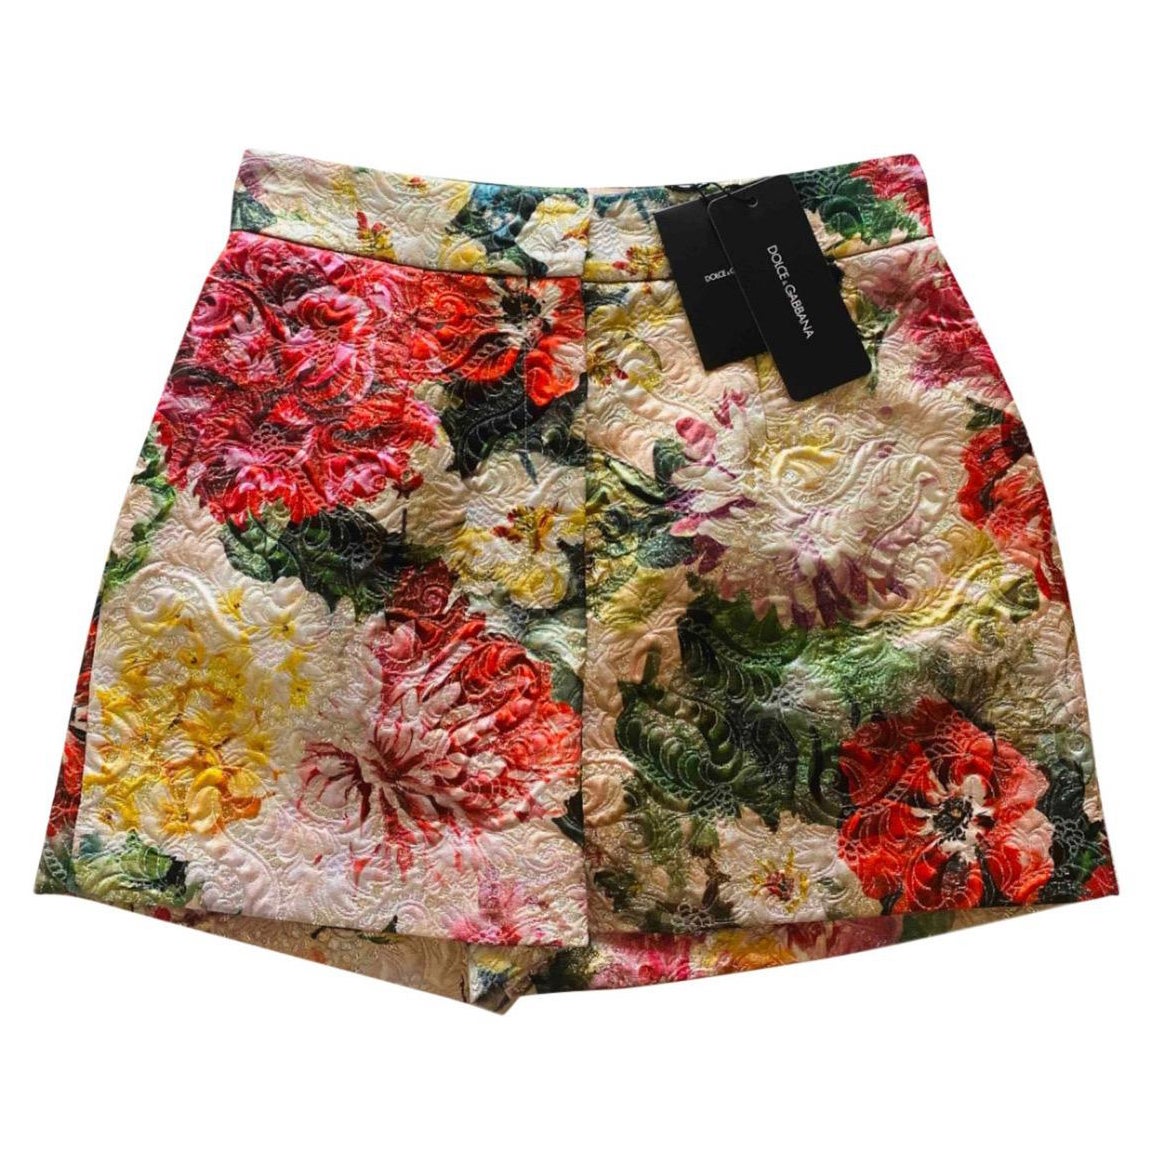 Dolce & Gabbana Rose floral printed
cotton brocade shorts For Sale